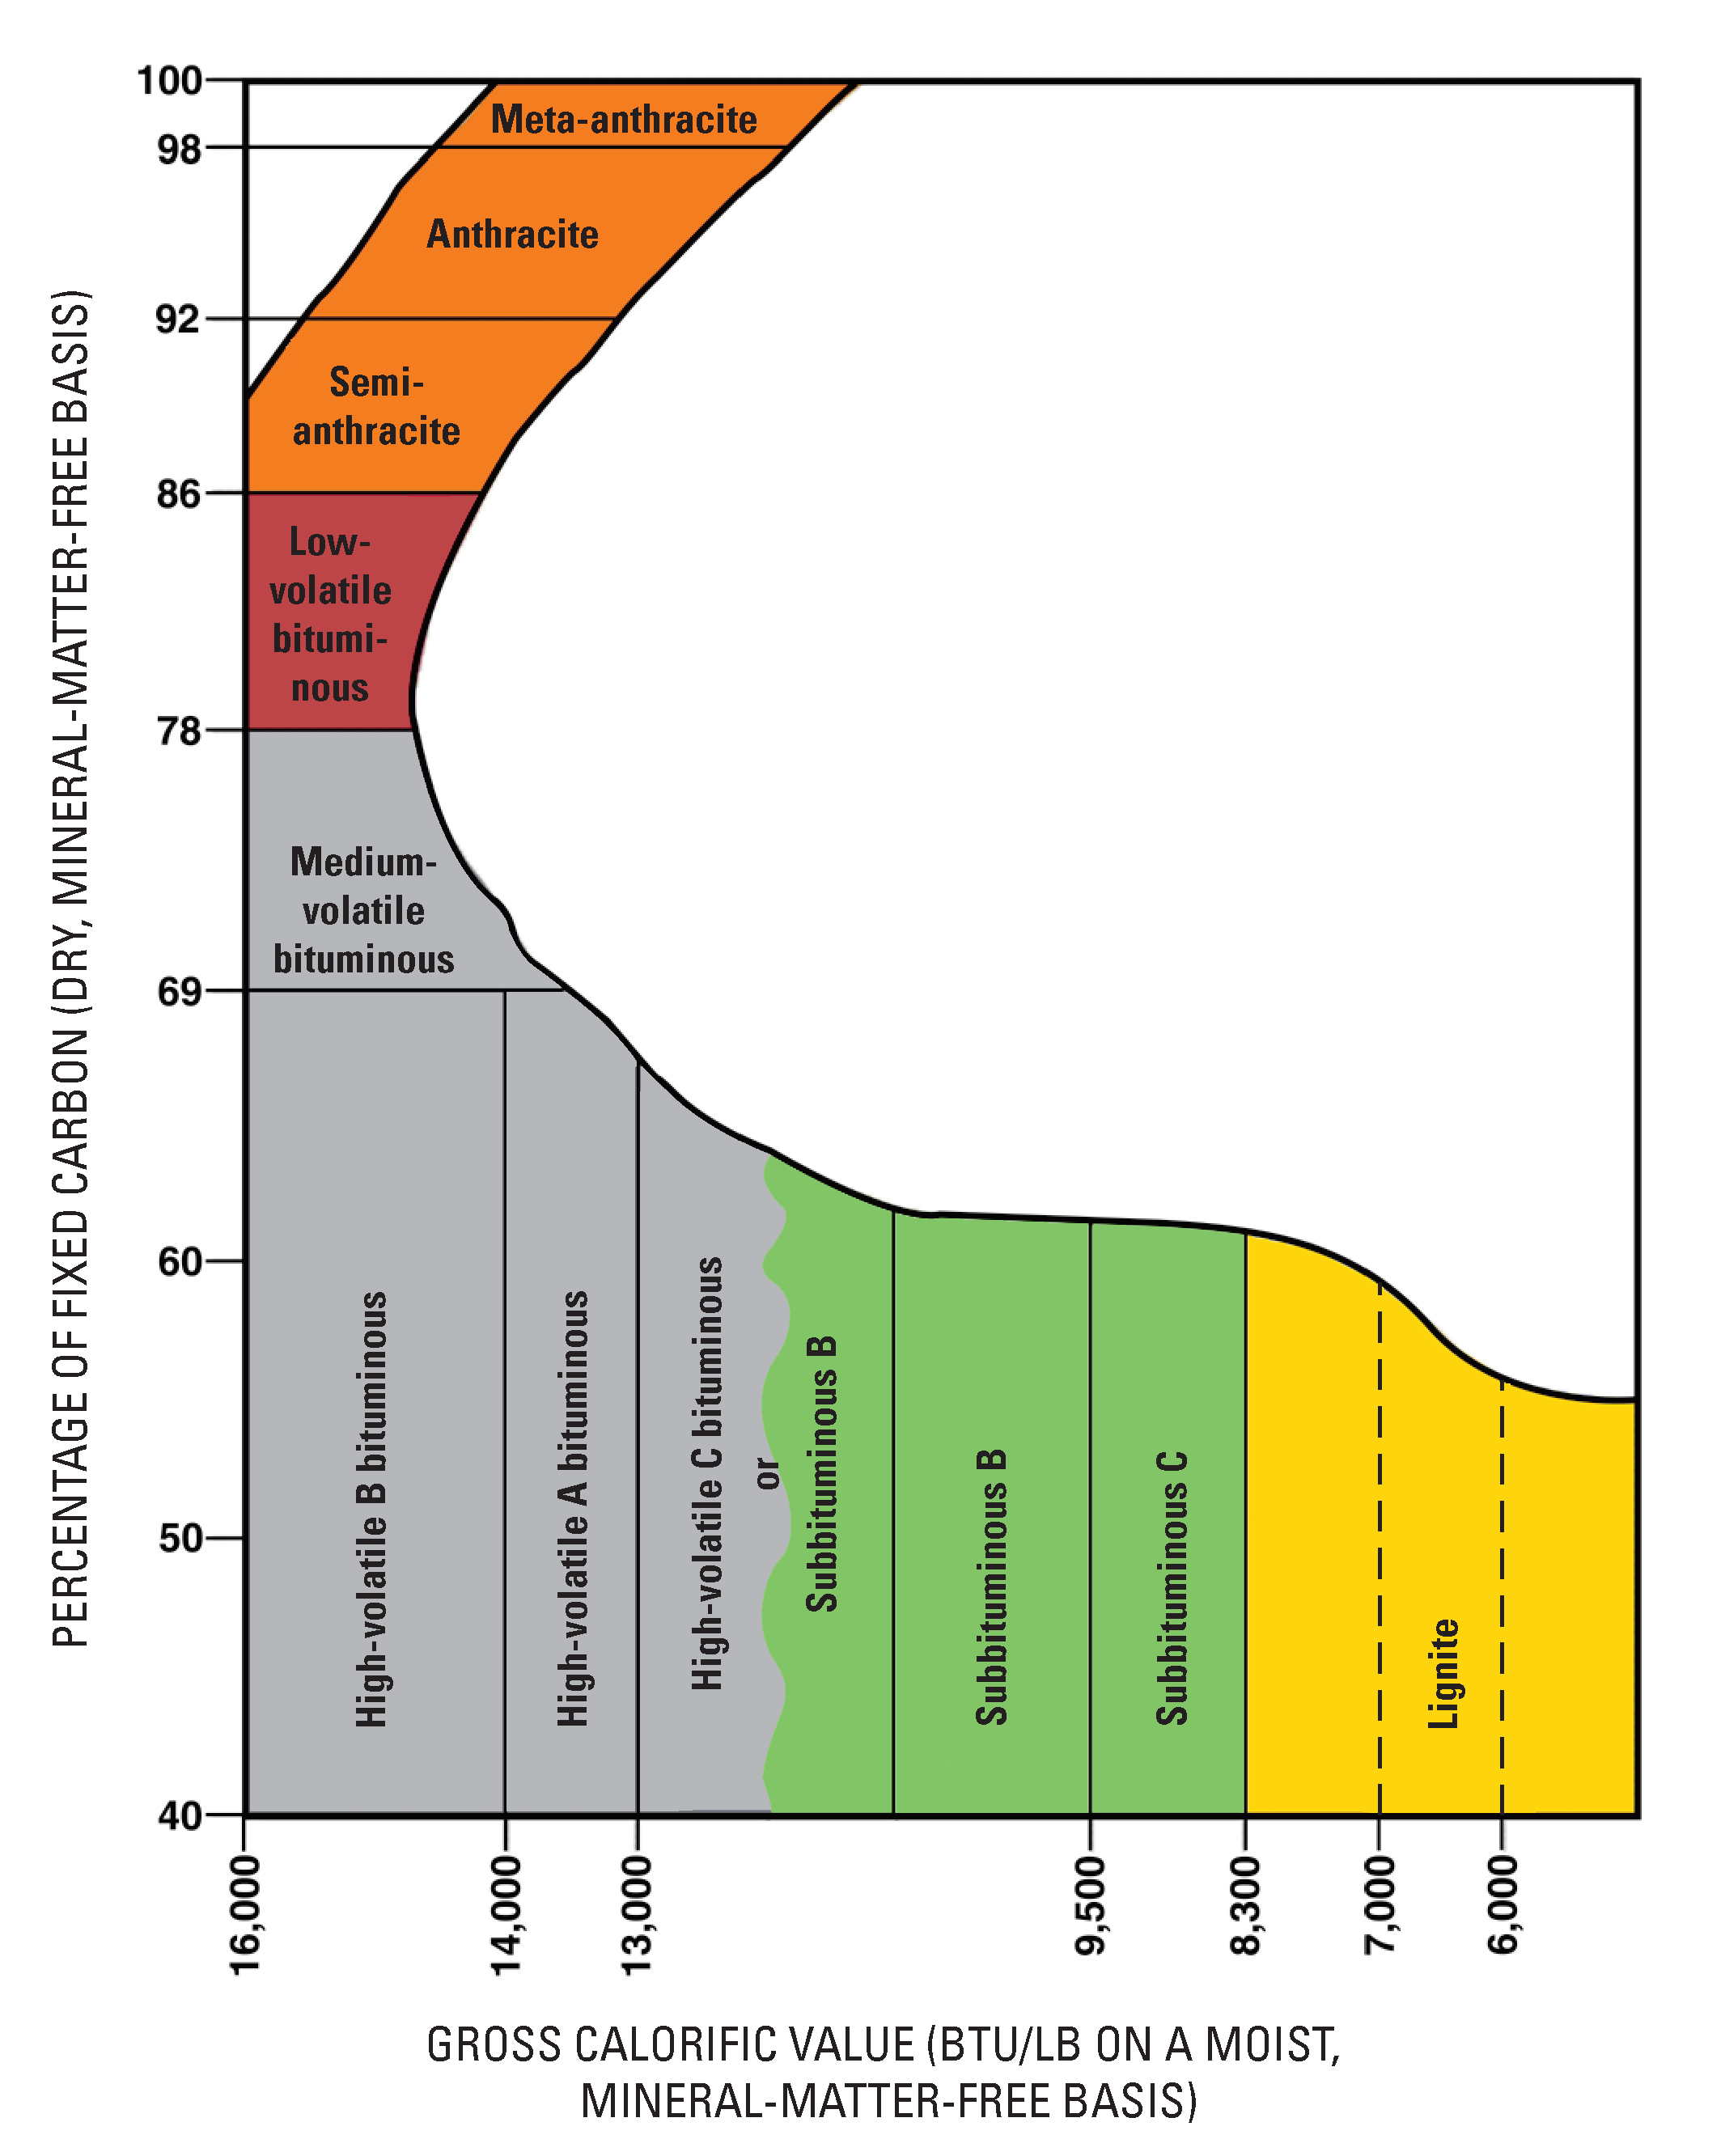 Coal ranking system used by the United States Geological Survey (USGS). As vegetative organic matter is buried deeper, and experiences higher pressures and temperatures, it progresses clockwise through the diagram, beginning with lignite. Additional heat and pressure result in the coal having a higher concentration of carbon (the vertical axis), and producing more energy (the horizontal axis). [USGS, public domain, https://commons.wikimedia.org/wiki/File:Coal_Rank_USGS.png#mw-jump-to-license]